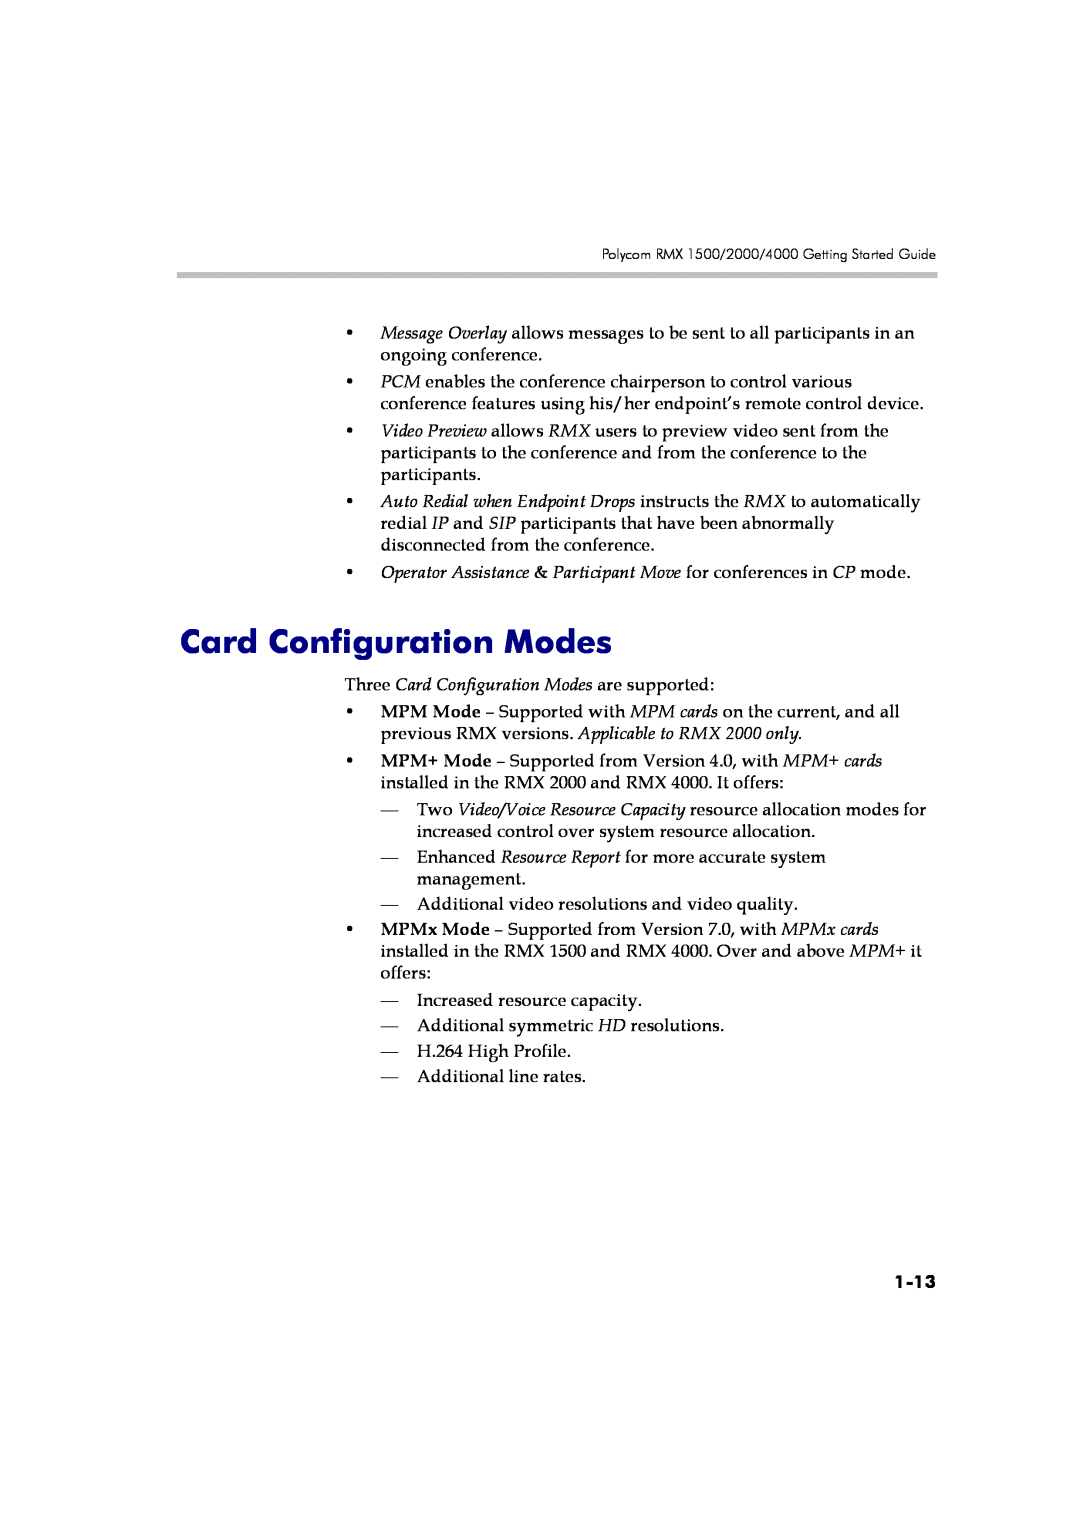 Polycom DOC2560B manual Card Configuration Modes, Operator Assistance & Participant Move for conferences in CP mode, 1-13 